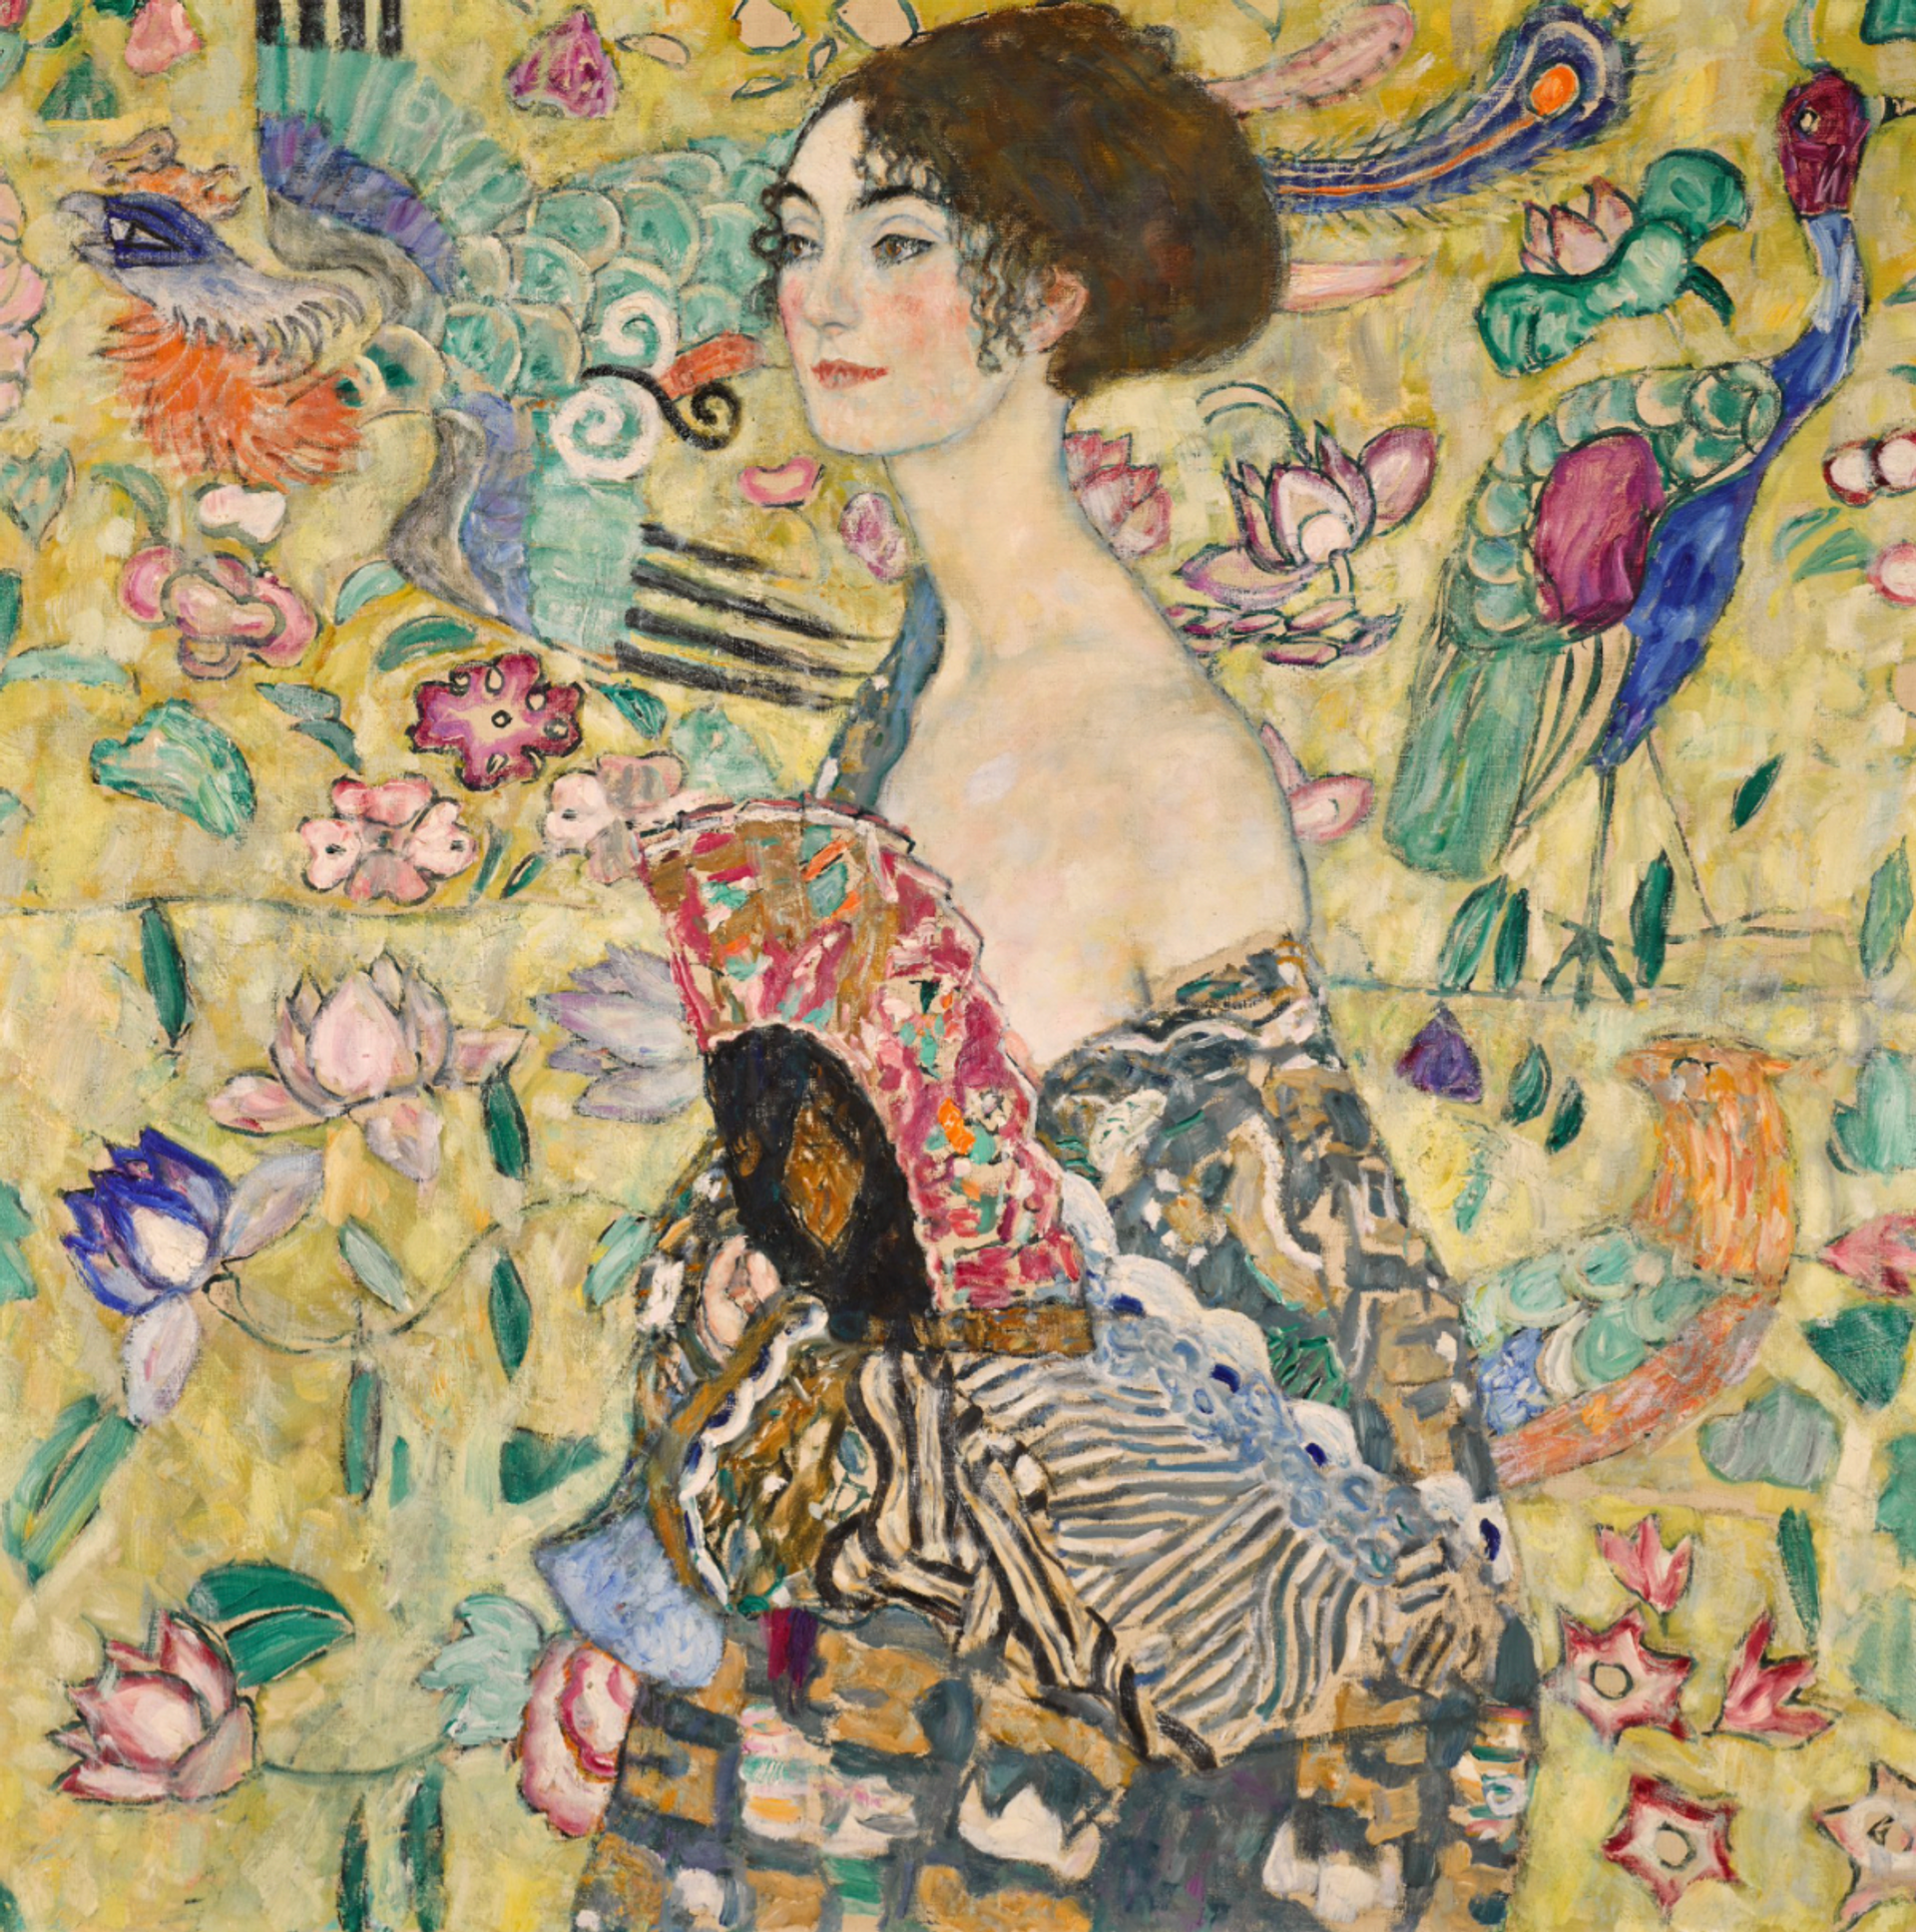 A colourful oil on canvas work by Gustav Klimt depicting a lady with a fan, set against a tapestry of flowers and birds.